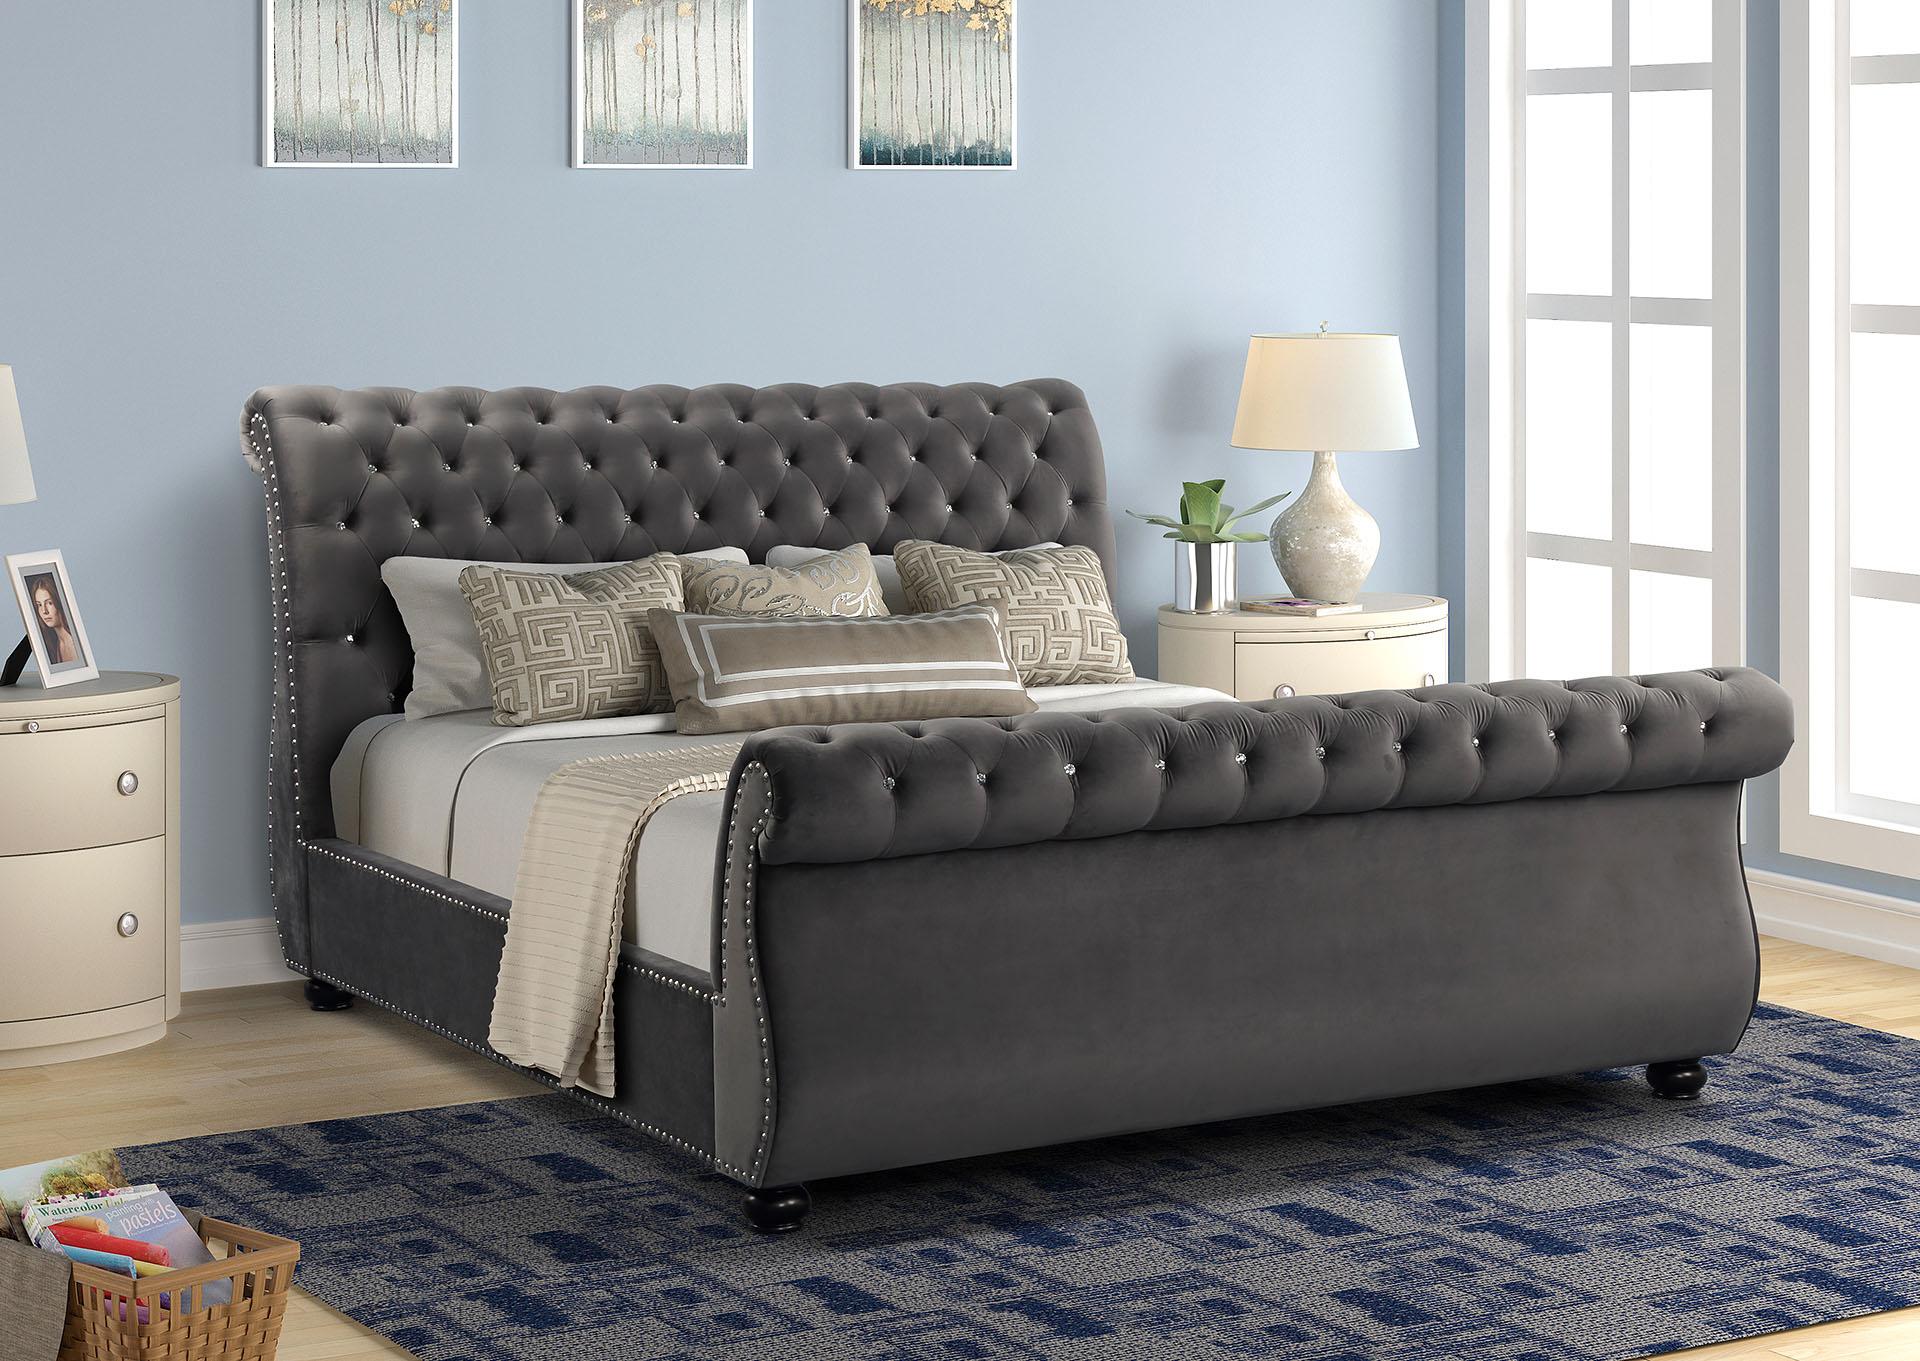 Galaxy Home Furniture KENDALL Sleigh Bed